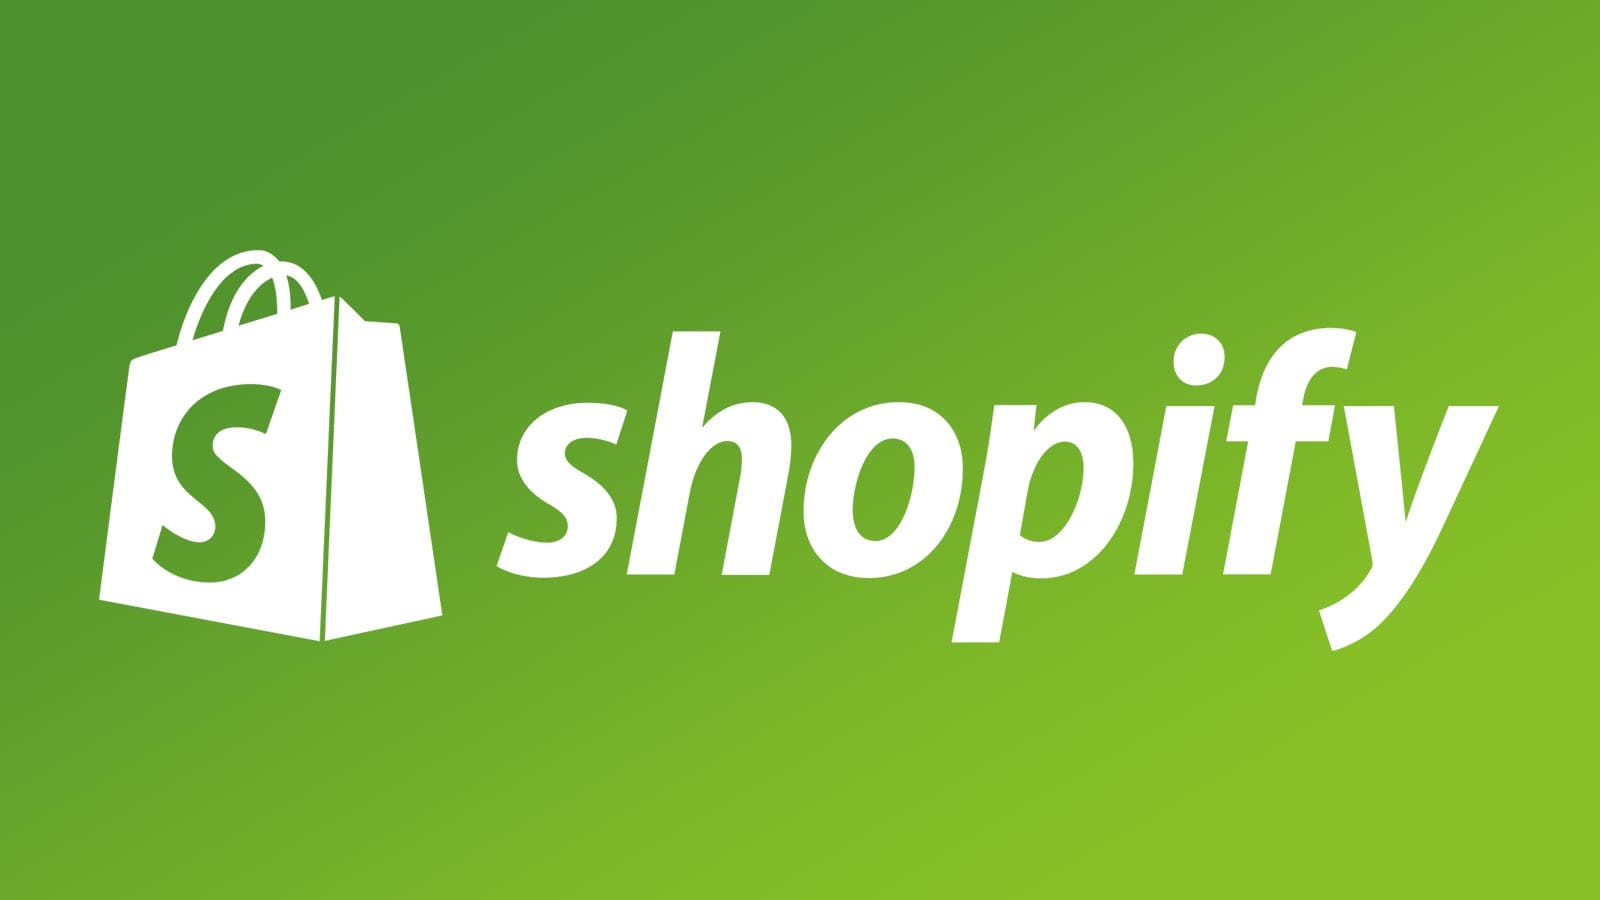 How to customize your Shopify email templates